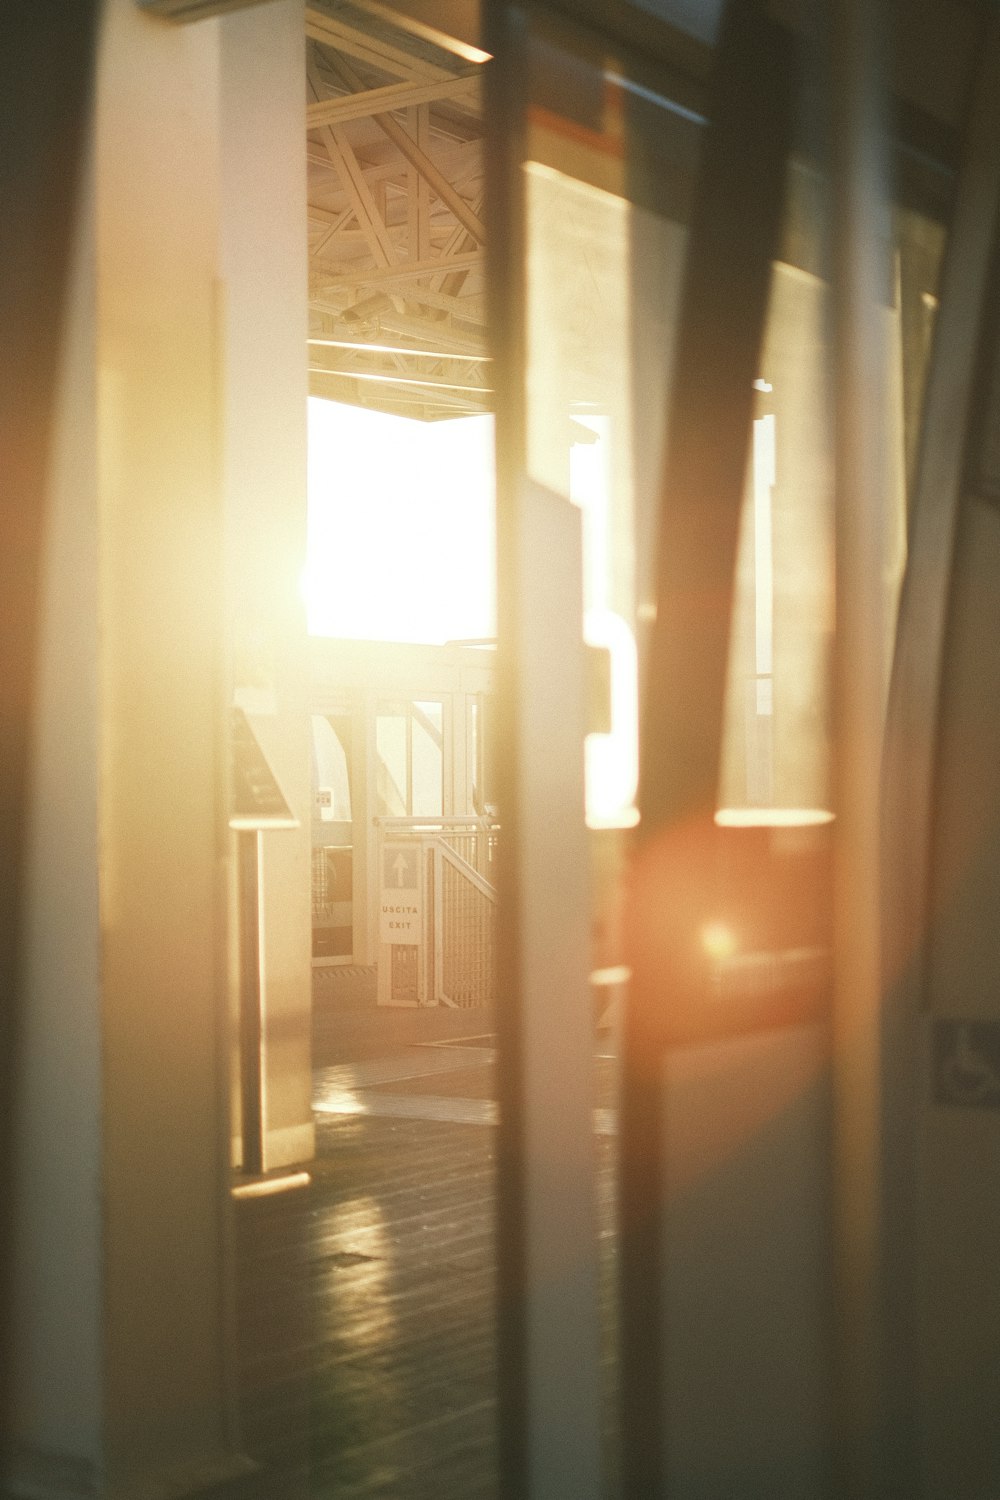 the sun is shining through the window of a train